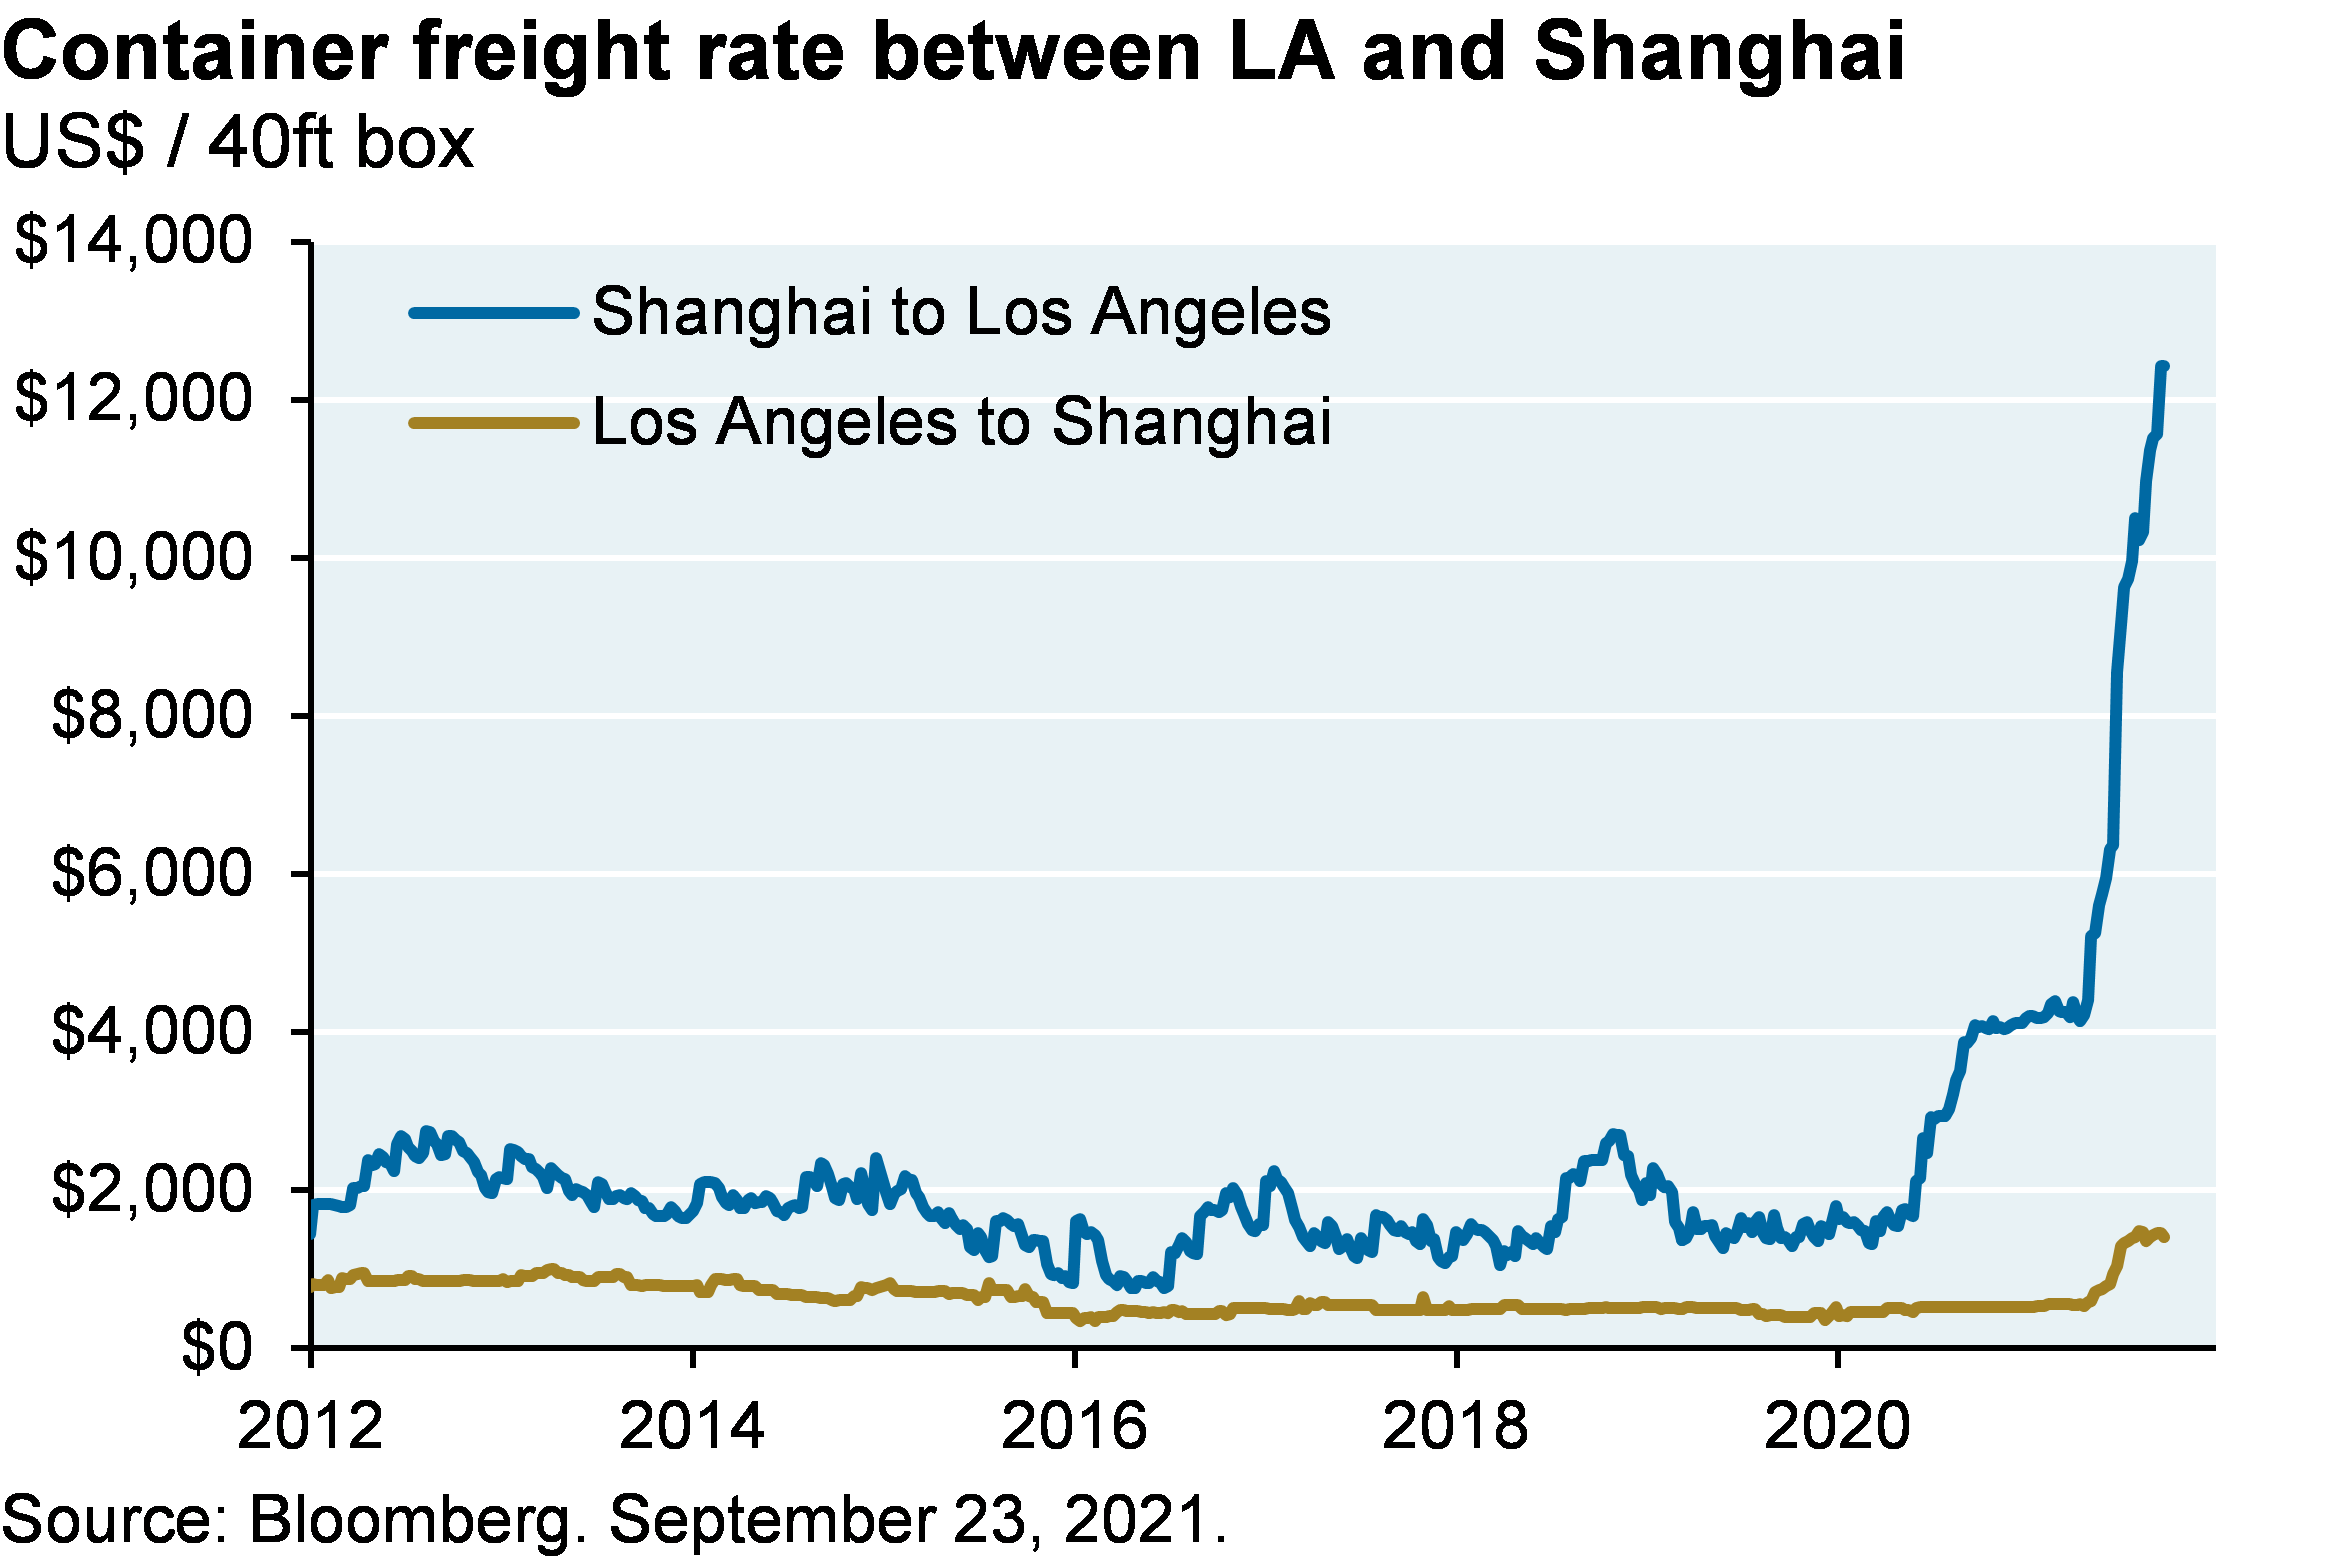 Line chart shows the container freight rate between LA and Shanghai, shown in US dollars per 40ft box. While the Los Angeles to Shanghai container freight rate has remained steady since 2012 (though with a small recent spike), the Shanghai to Los Angeles freight rate has spiked from a normal value of around $2,000 to a most recent peak of over $12,000 per 40ft box.